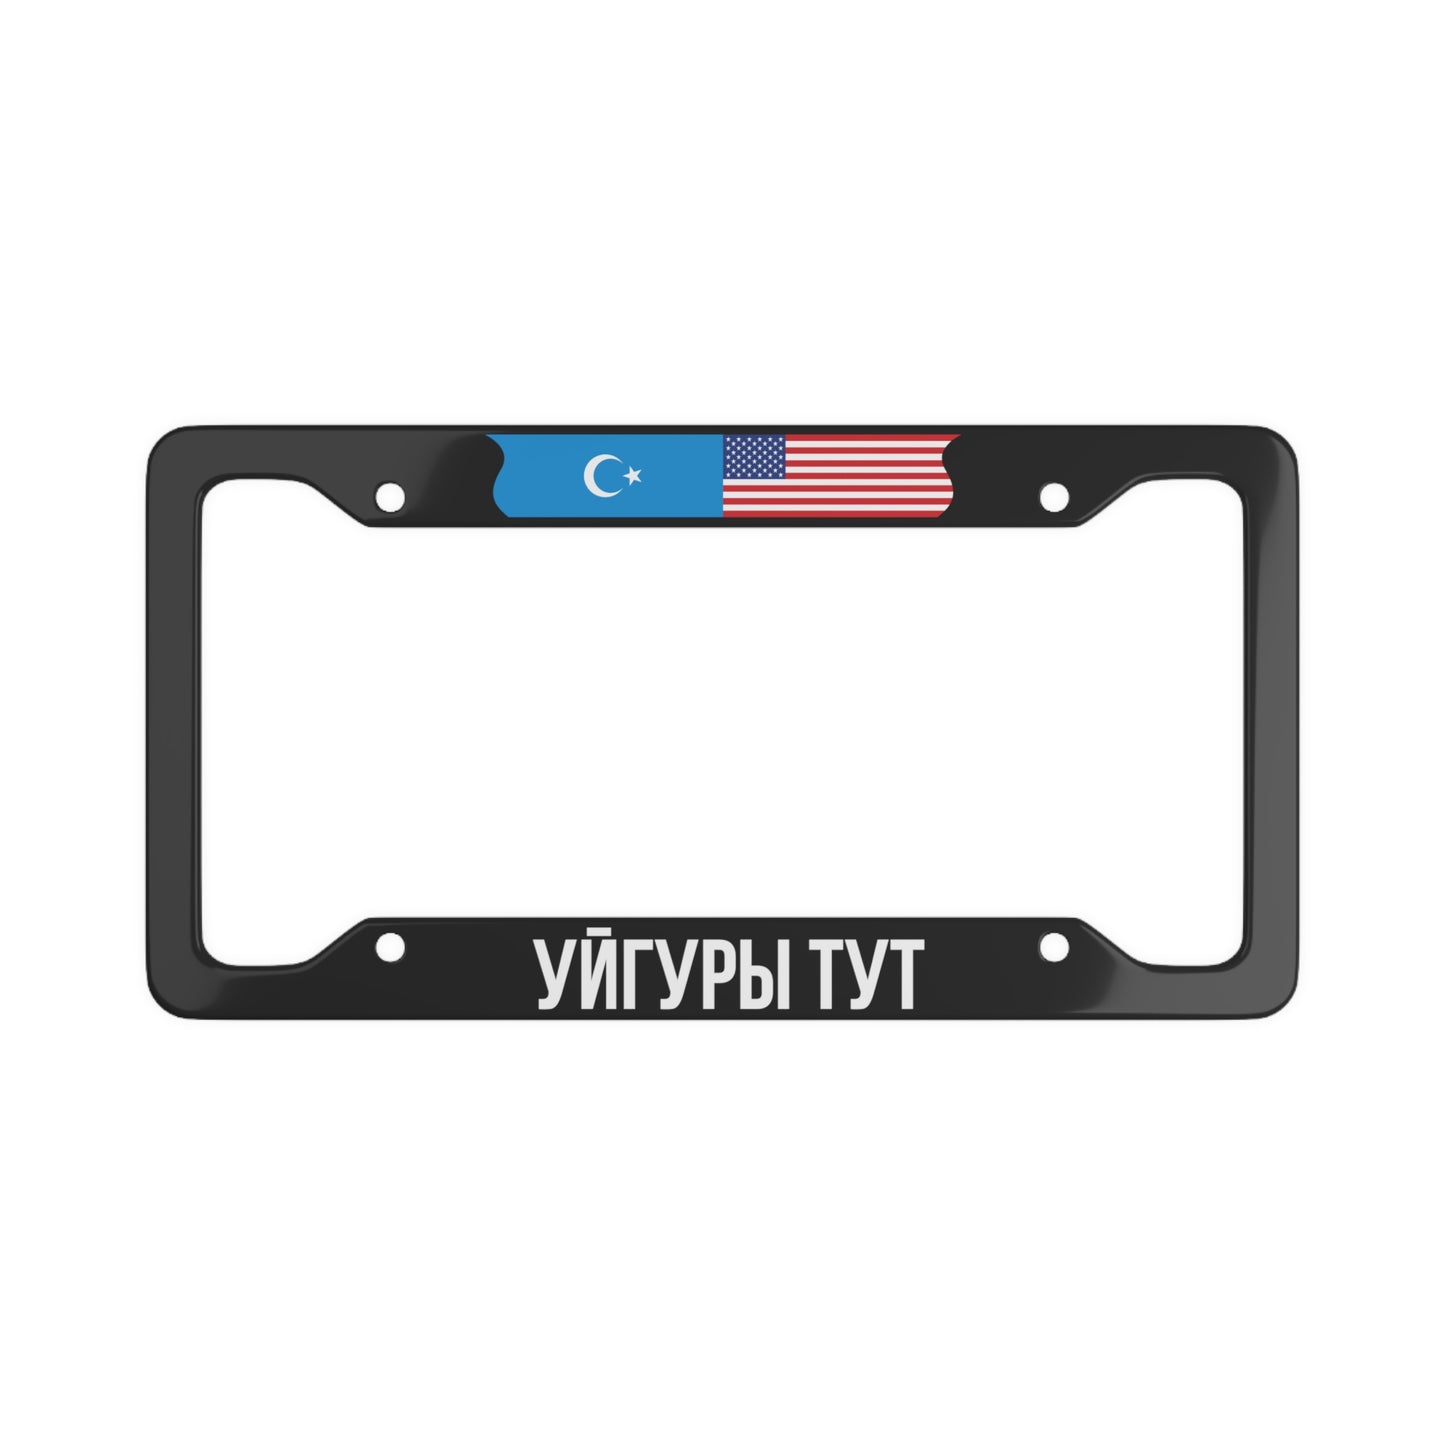 Uyghurs are here American License Plate Frame